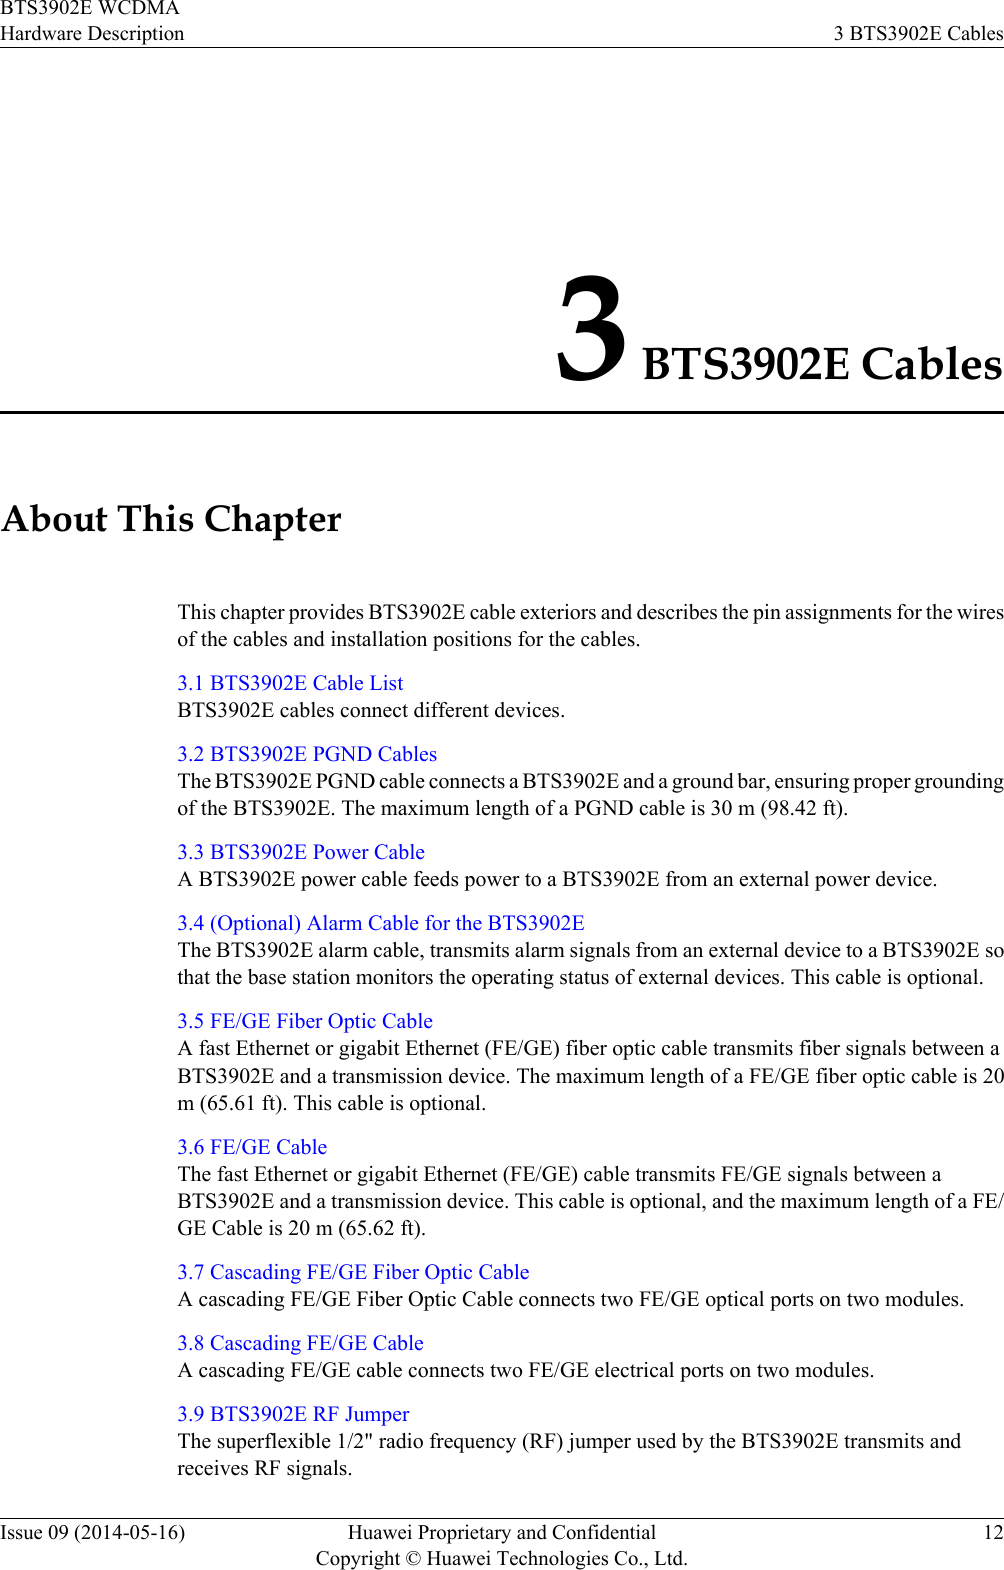 3 BTS3902E CablesAbout This ChapterThis chapter provides BTS3902E cable exteriors and describes the pin assignments for the wiresof the cables and installation positions for the cables.3.1 BTS3902E Cable ListBTS3902E cables connect different devices.3.2 BTS3902E PGND CablesThe BTS3902E PGND cable connects a BTS3902E and a ground bar, ensuring proper groundingof the BTS3902E. The maximum length of a PGND cable is 30 m (98.42 ft).3.3 BTS3902E Power CableA BTS3902E power cable feeds power to a BTS3902E from an external power device.3.4 (Optional) Alarm Cable for the BTS3902EThe BTS3902E alarm cable, transmits alarm signals from an external device to a BTS3902E sothat the base station monitors the operating status of external devices. This cable is optional.3.5 FE/GE Fiber Optic CableA fast Ethernet or gigabit Ethernet (FE/GE) fiber optic cable transmits fiber signals between aBTS3902E and a transmission device. The maximum length of a FE/GE fiber optic cable is 20m (65.61 ft). This cable is optional.3.6 FE/GE CableThe fast Ethernet or gigabit Ethernet (FE/GE) cable transmits FE/GE signals between aBTS3902E and a transmission device. This cable is optional, and the maximum length of a FE/GE Cable is 20 m (65.62 ft).3.7 Cascading FE/GE Fiber Optic CableA cascading FE/GE Fiber Optic Cable connects two FE/GE optical ports on two modules.3.8 Cascading FE/GE CableA cascading FE/GE cable connects two FE/GE electrical ports on two modules.3.9 BTS3902E RF JumperThe superflexible 1/2&quot; radio frequency (RF) jumper used by the BTS3902E transmits andreceives RF signals.BTS3902E WCDMAHardware Description 3 BTS3902E CablesIssue 09 (2014-05-16) Huawei Proprietary and ConfidentialCopyright © Huawei Technologies Co., Ltd.12